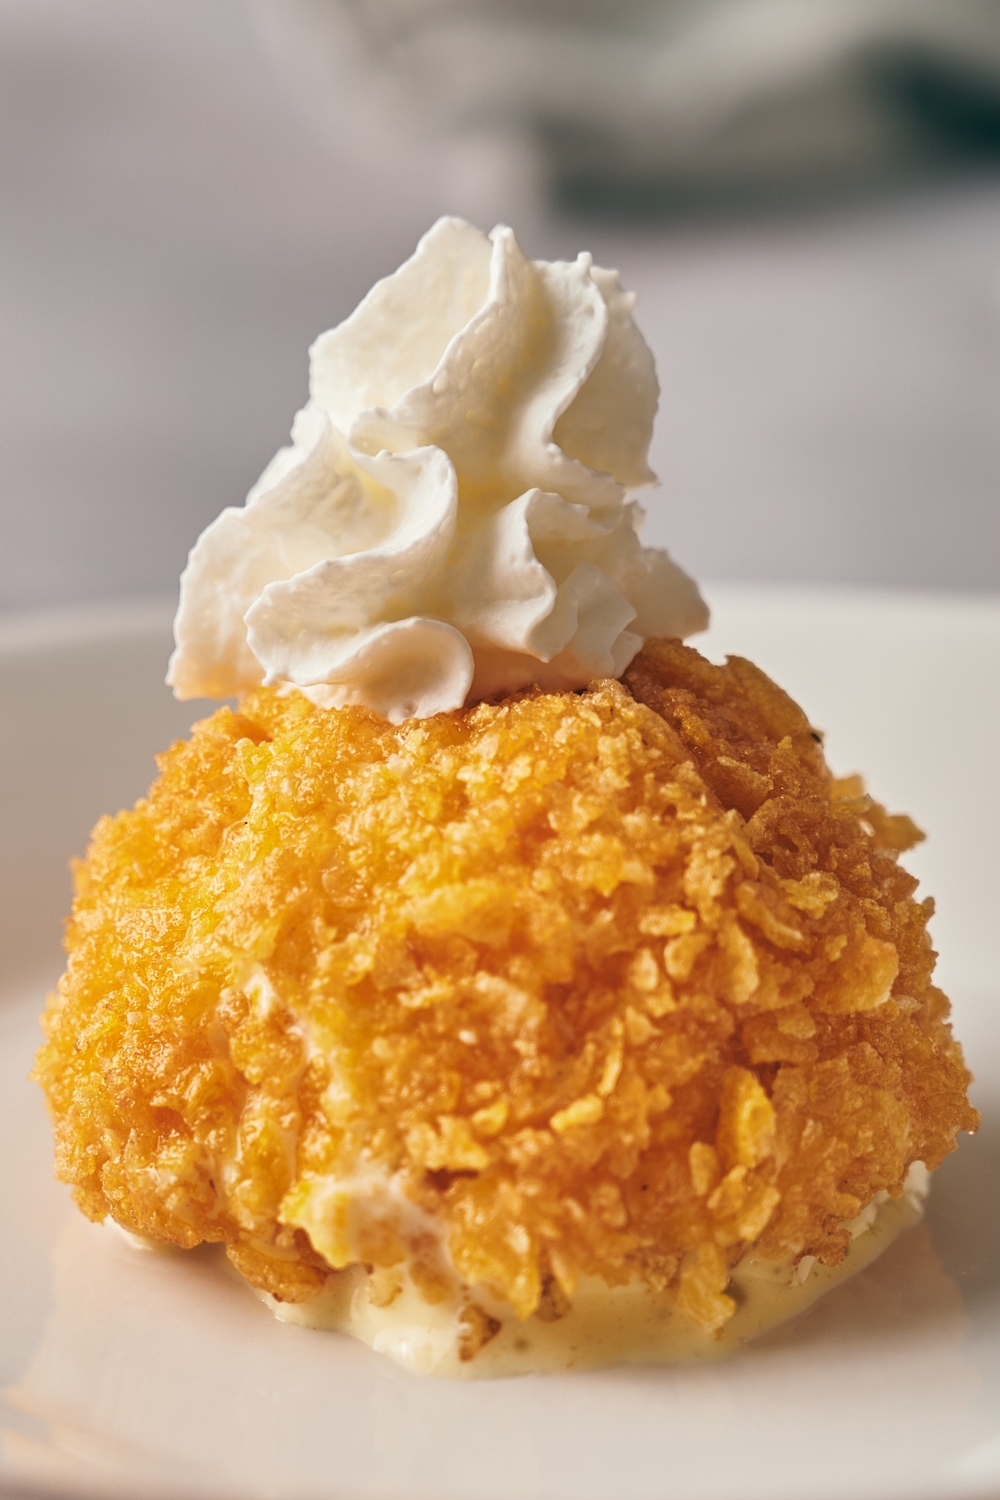 A plate with fried ice cream topped with whipped topping.